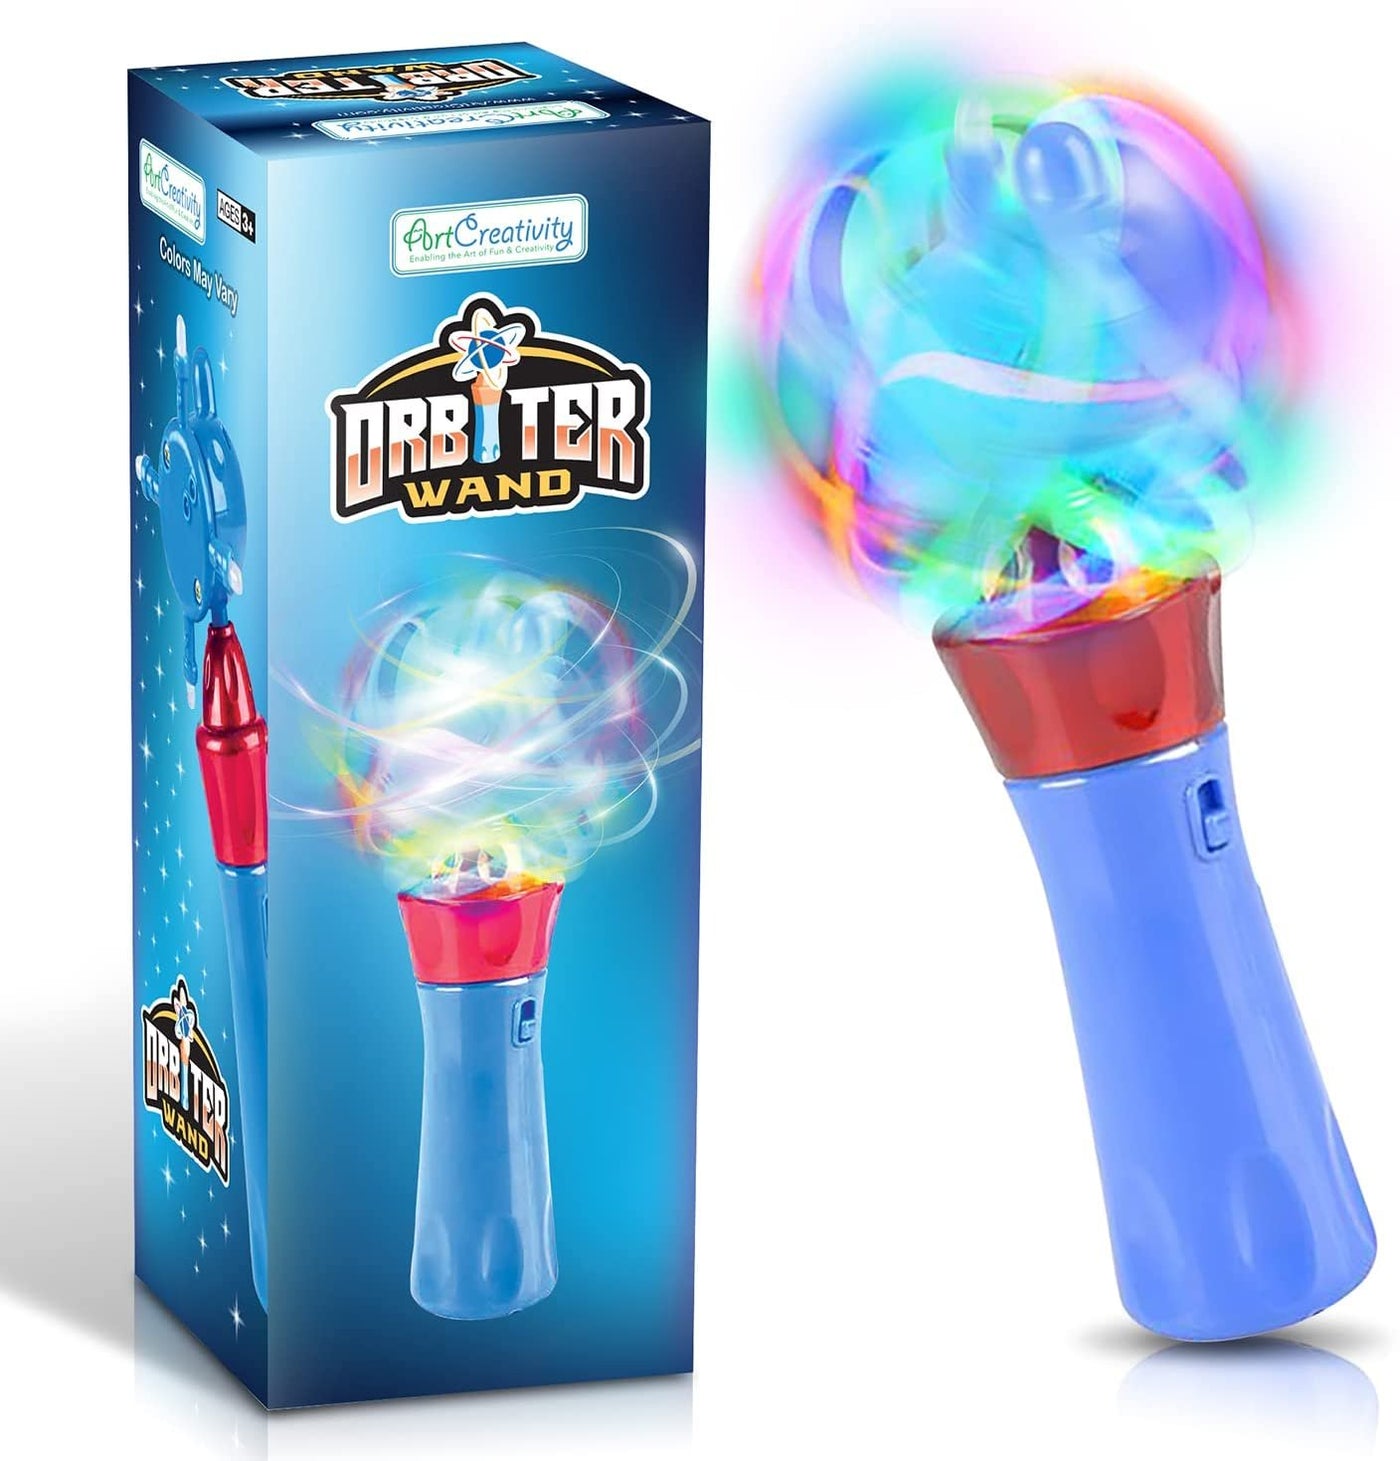 Light Up Orbiter Spinning Wand, 7" LED Spin Toy with Batteries Included, Great Gift Idea for Boys, Girls, Toddlers, Fun Birthday Party Favor, Carnival Prize - Colors May Vary